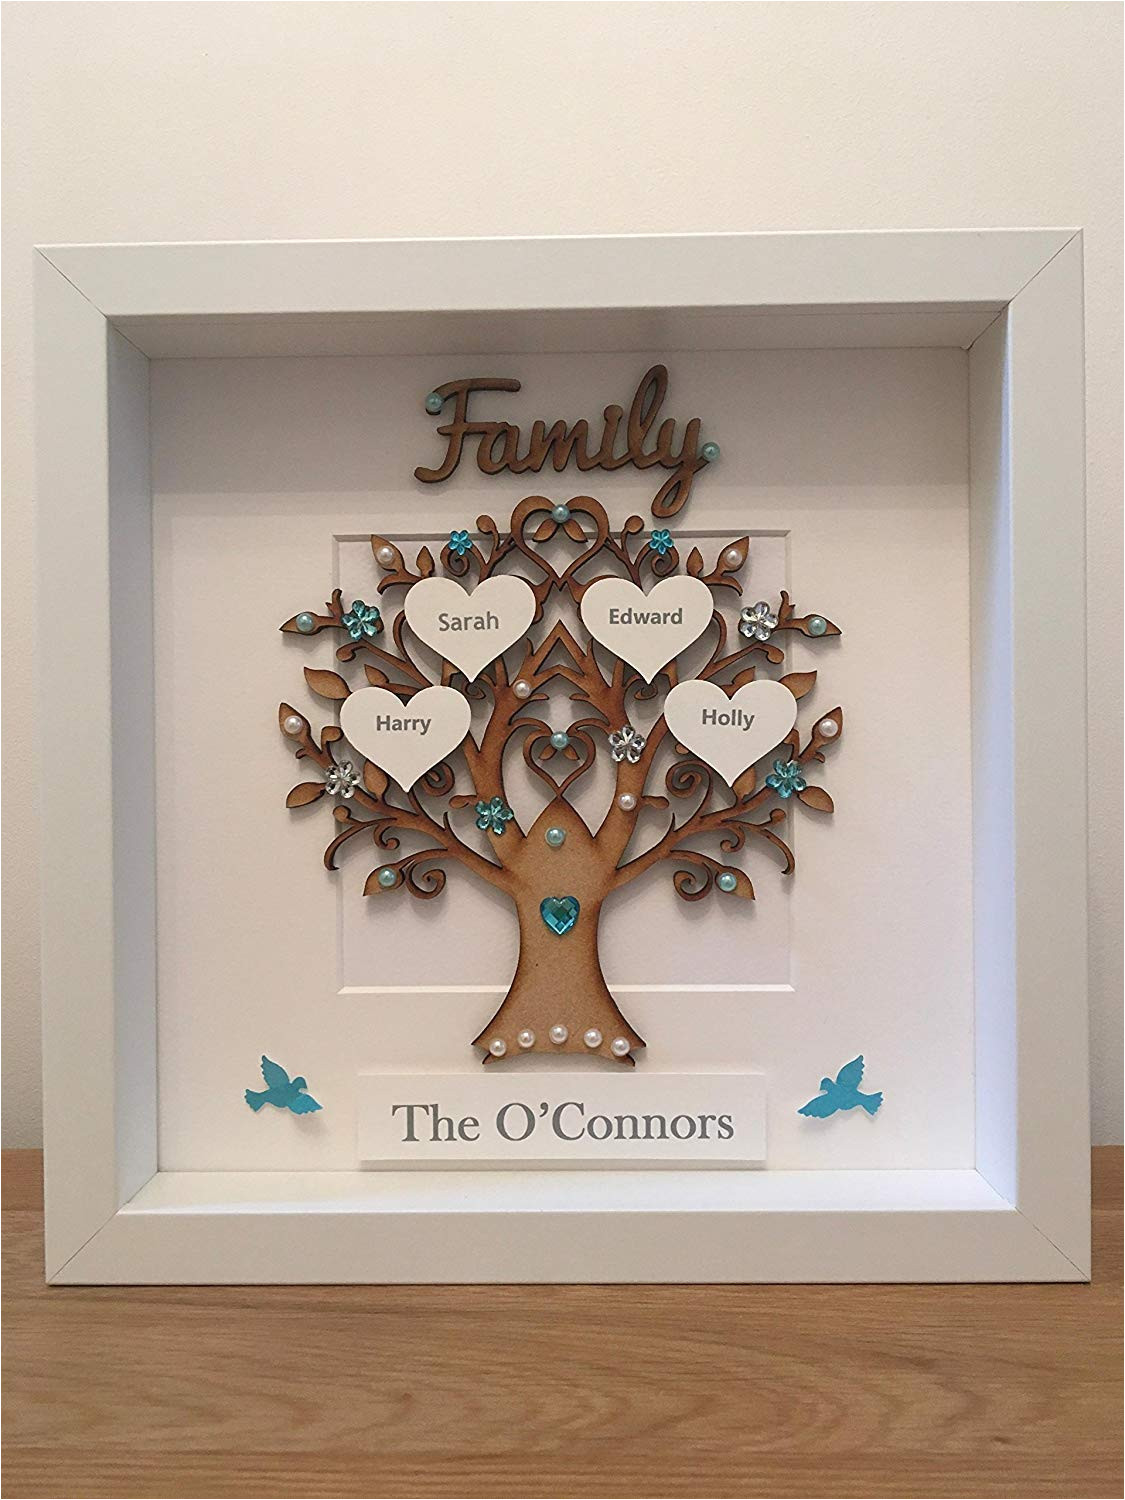 personalised family tree 3d box frame picture keepsake wedding gift home christmas birthday anniversary mothers day turquoise gem birds up to 14 names